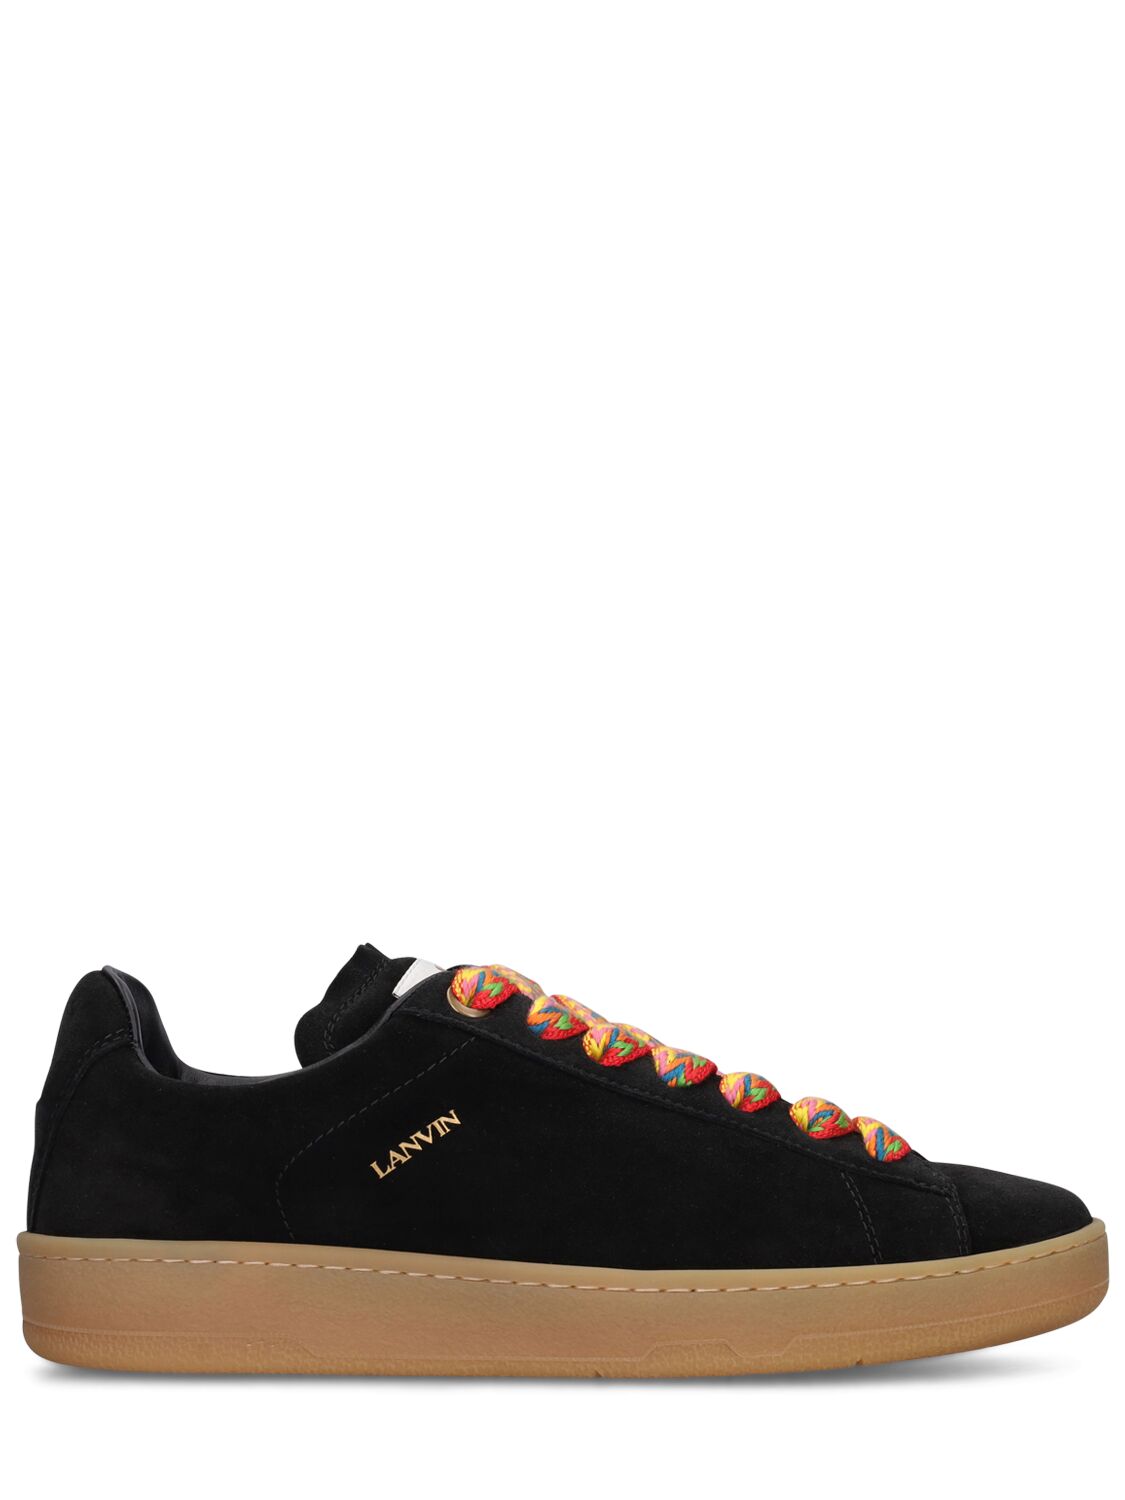 Lanvin Lite Curb Leather Low Top Sneakers In Black